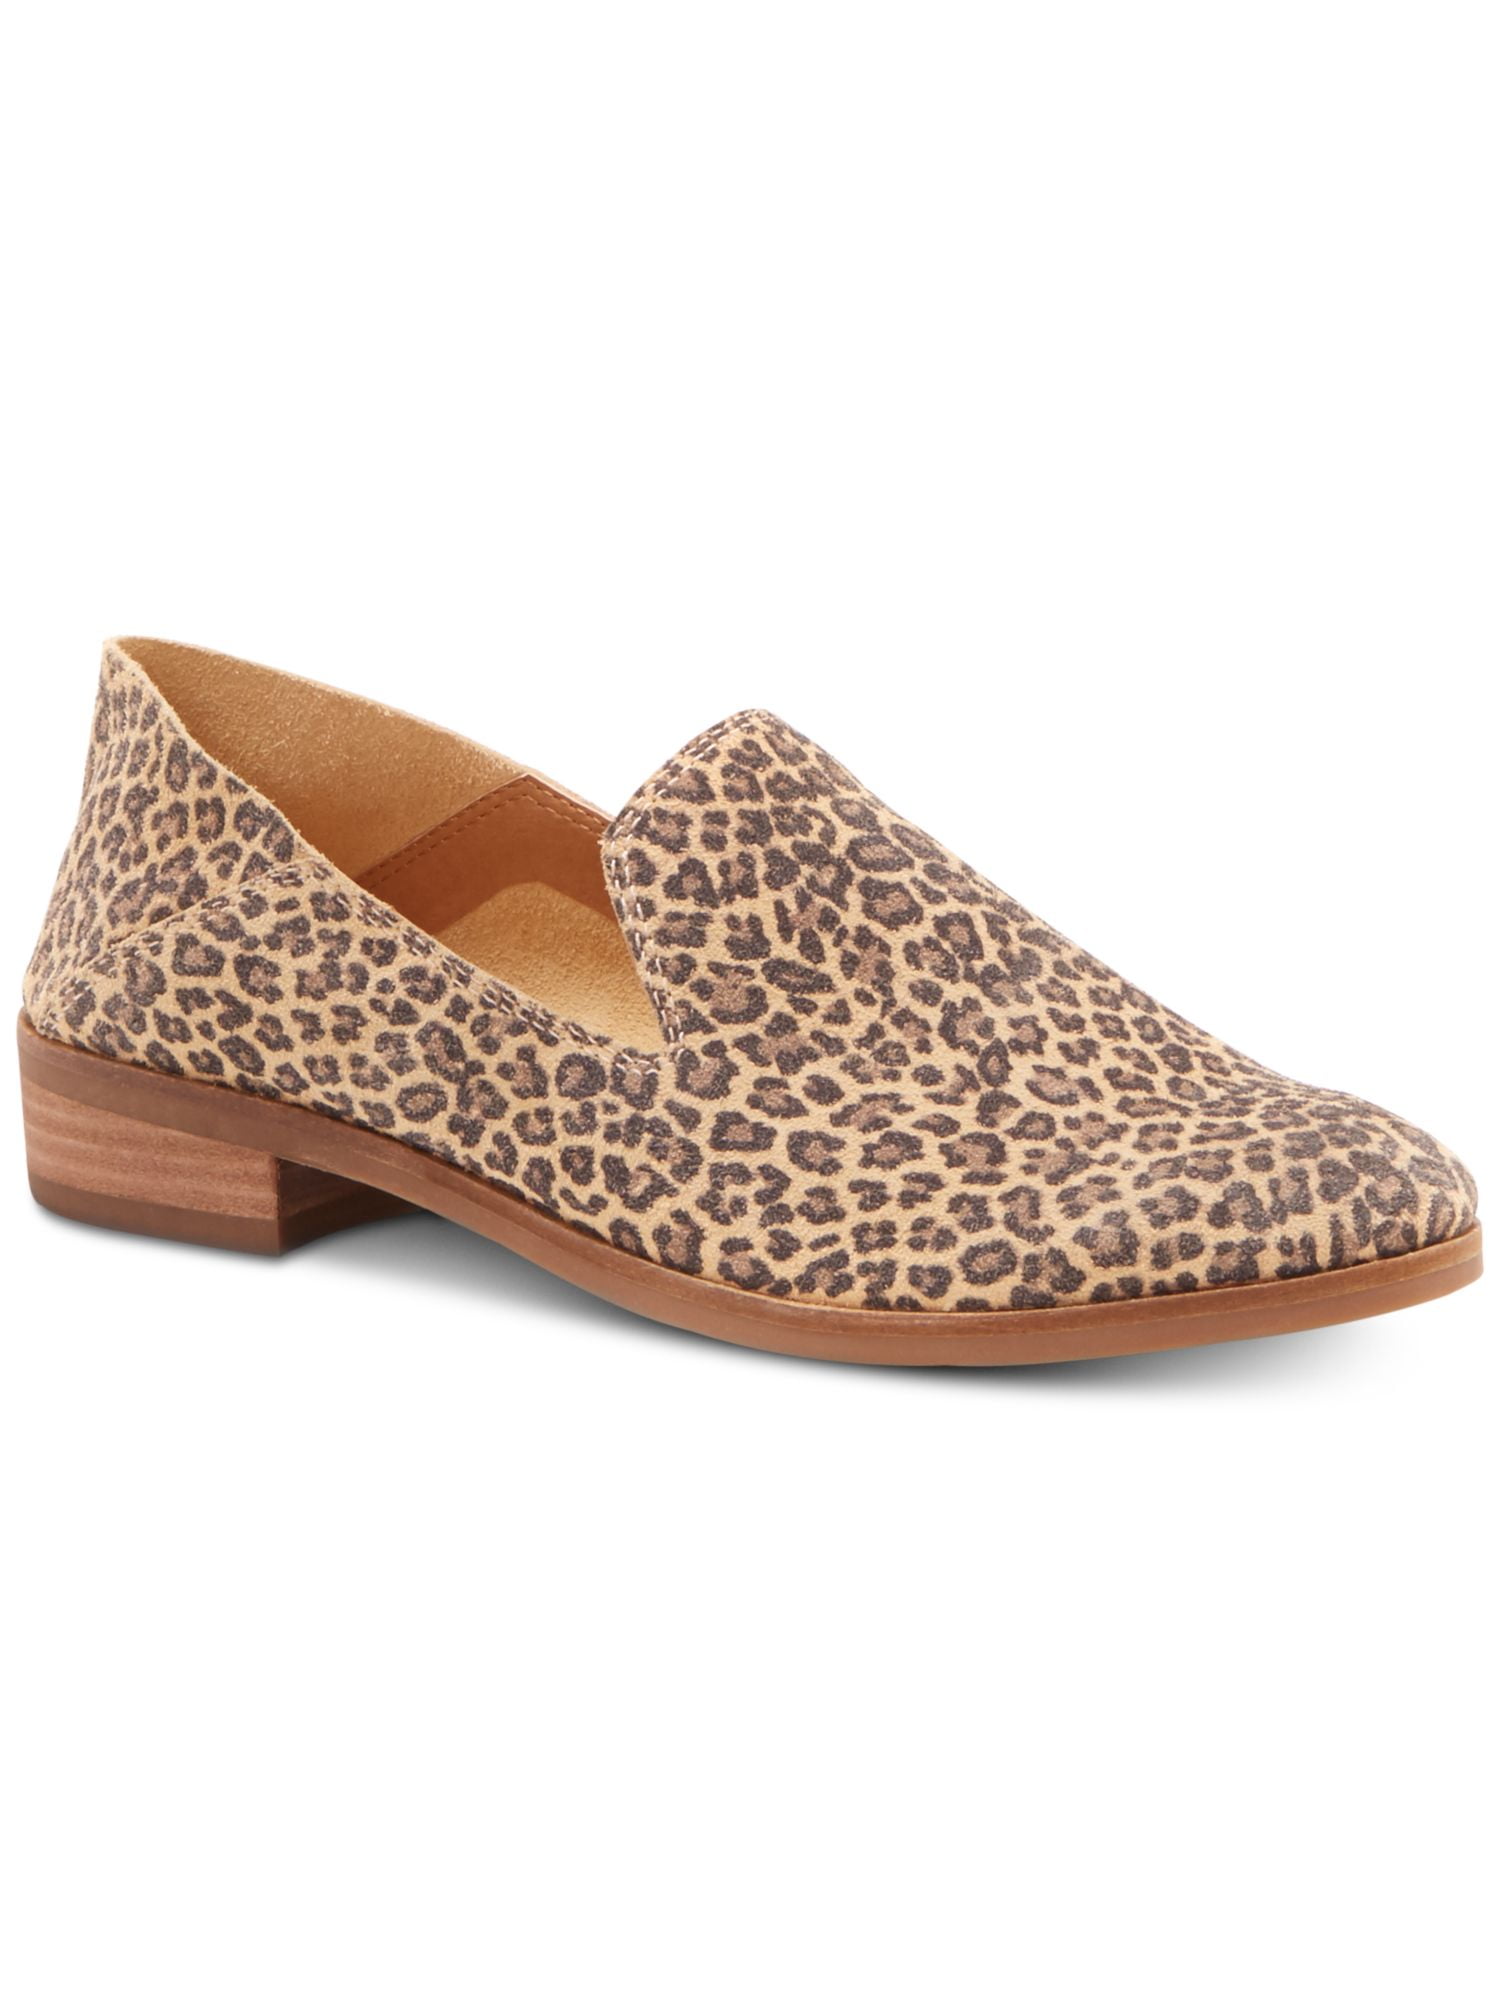 LUCKY BRAND Womens Brown Cut-Out Side Menswear-Inspired Cahill Round Toe  Block Heel Slip On Flats 8.5 M 